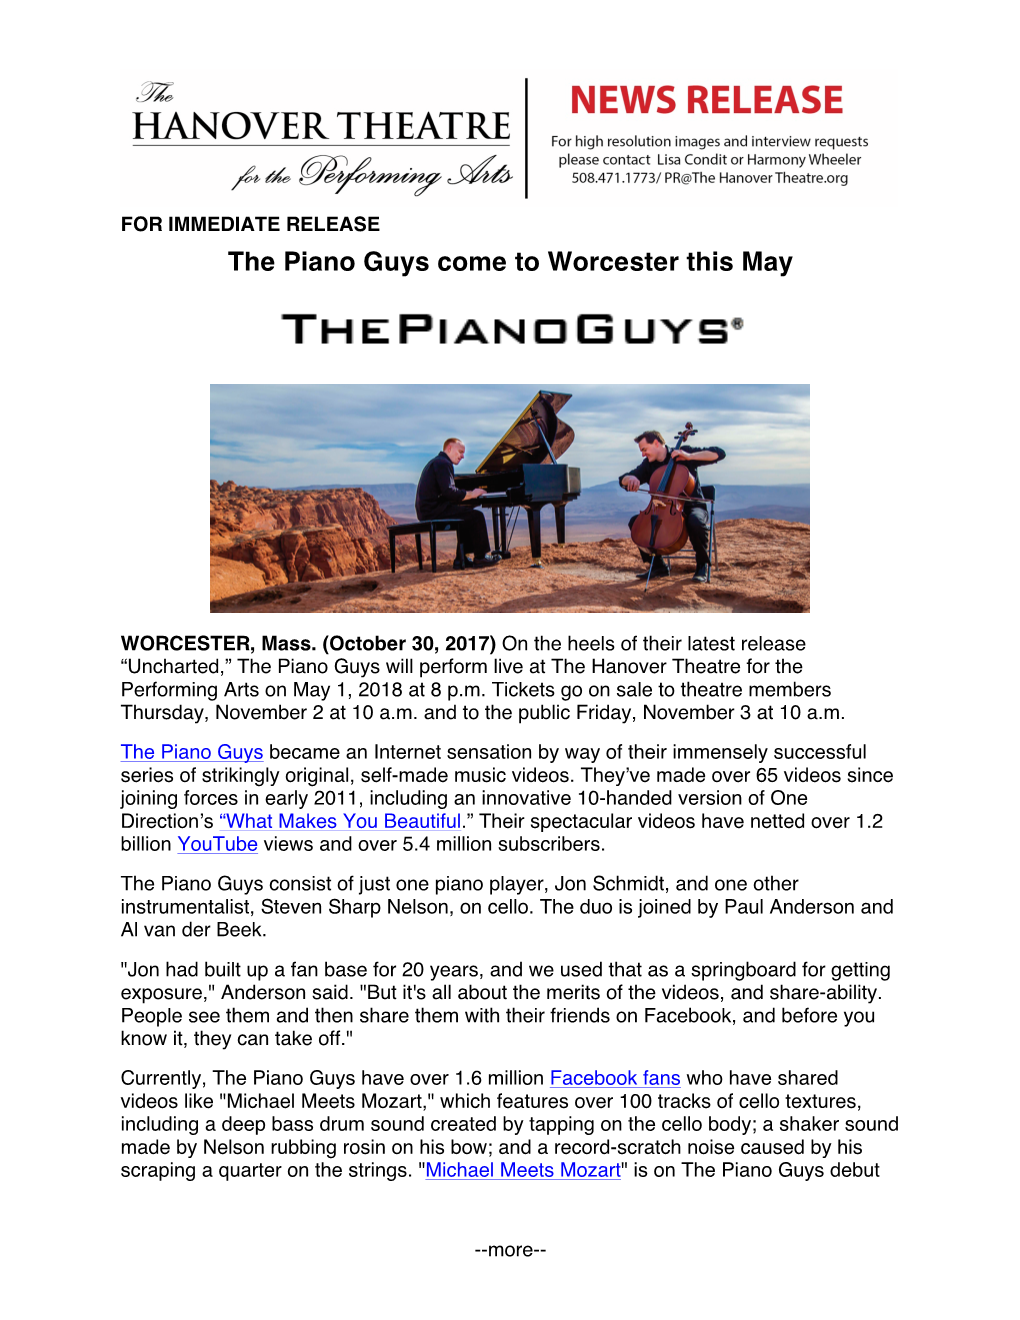 The Piano Guys Come to Worcester This May